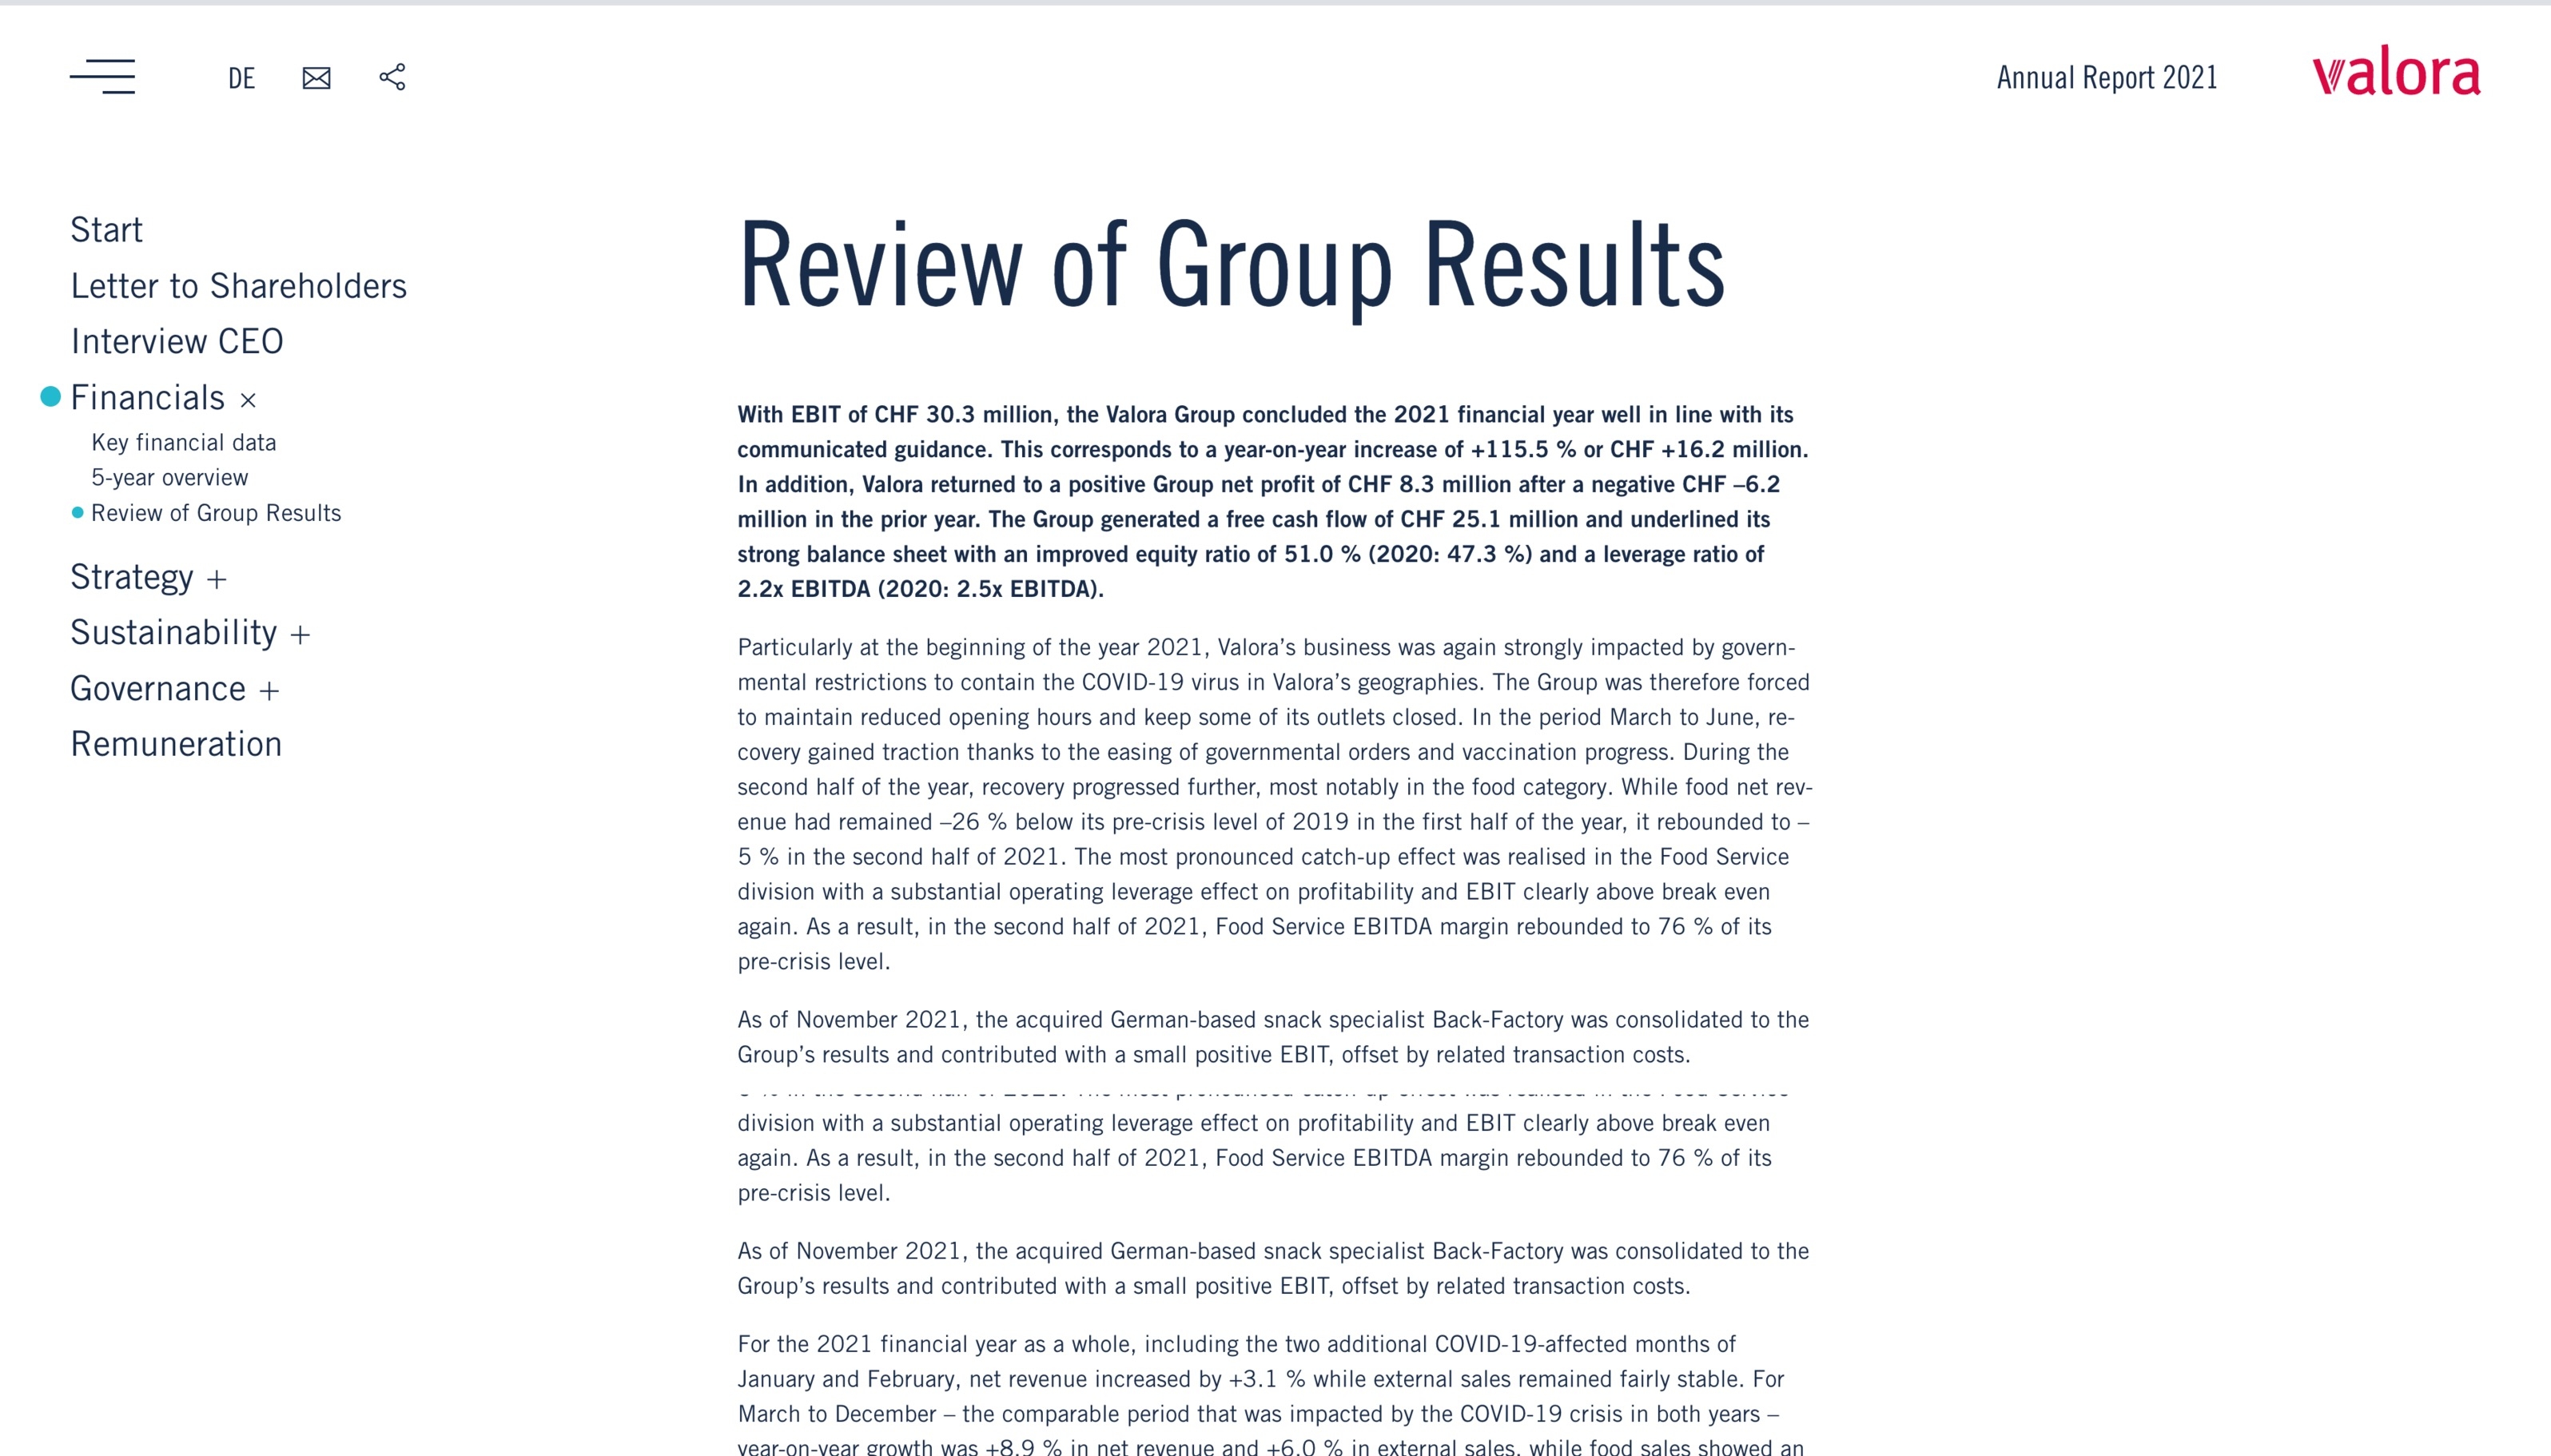 Review of Group Results - Annual Report 2021